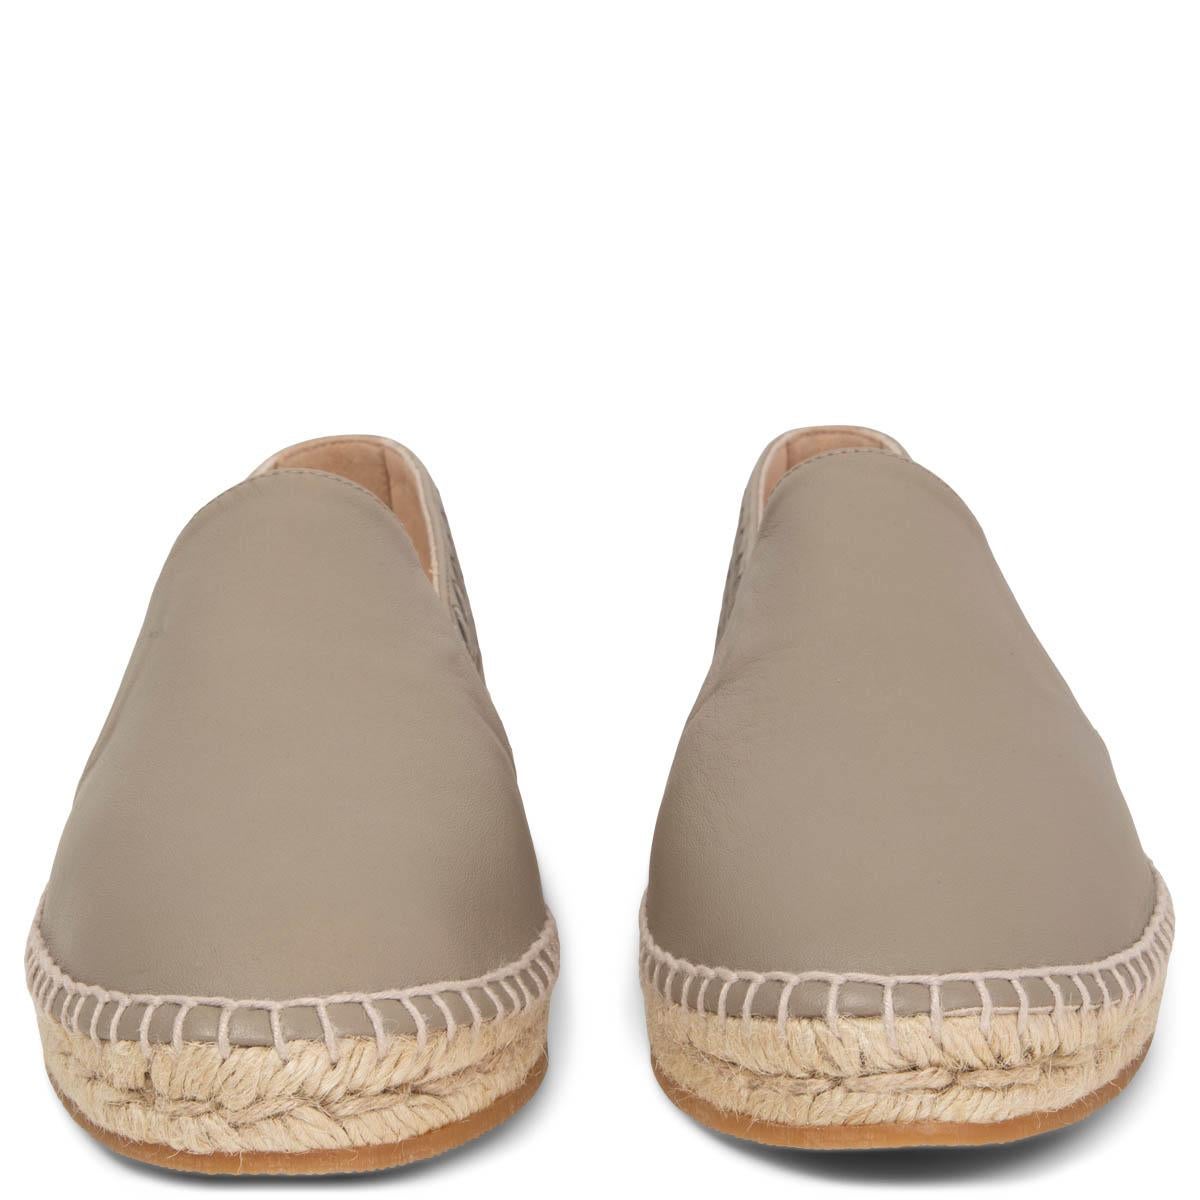 100% authentic Bottega Veneta Gala Espadrilles in taupe leather featuring Intrecciato detail around the heel and a beige raffia sole. Brand new. Come with dust bag. 

Measurements
Imprinted Size	38
Shoe Size	38
Inside Sole	25cm (9.8in)
Width	7.5cm